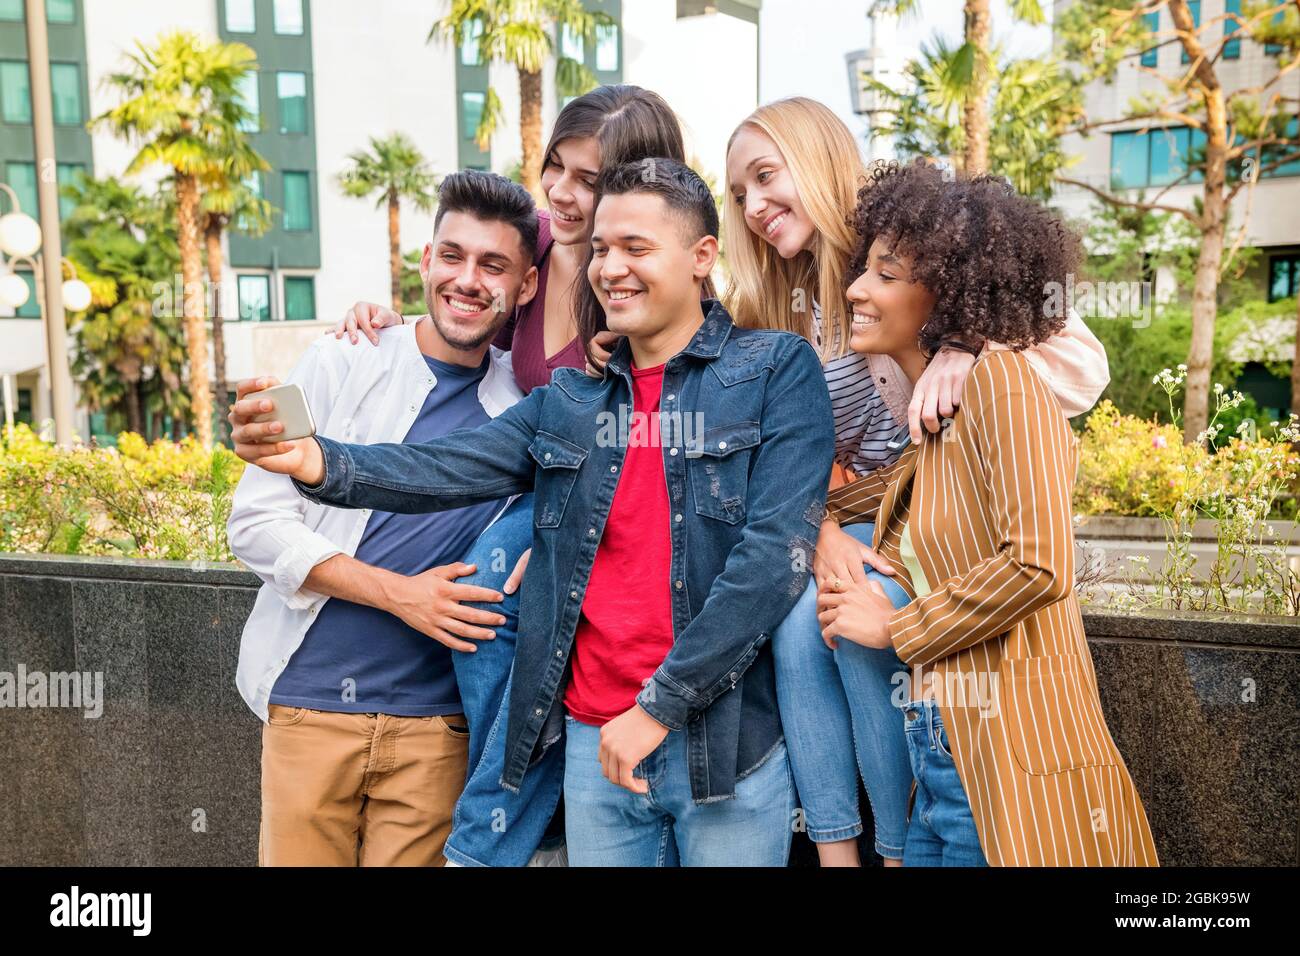 Group of five happy multicultural friends taking a selfie on a mobile phone on a city street laughing and smiling as they pose for the camera Stock Photo